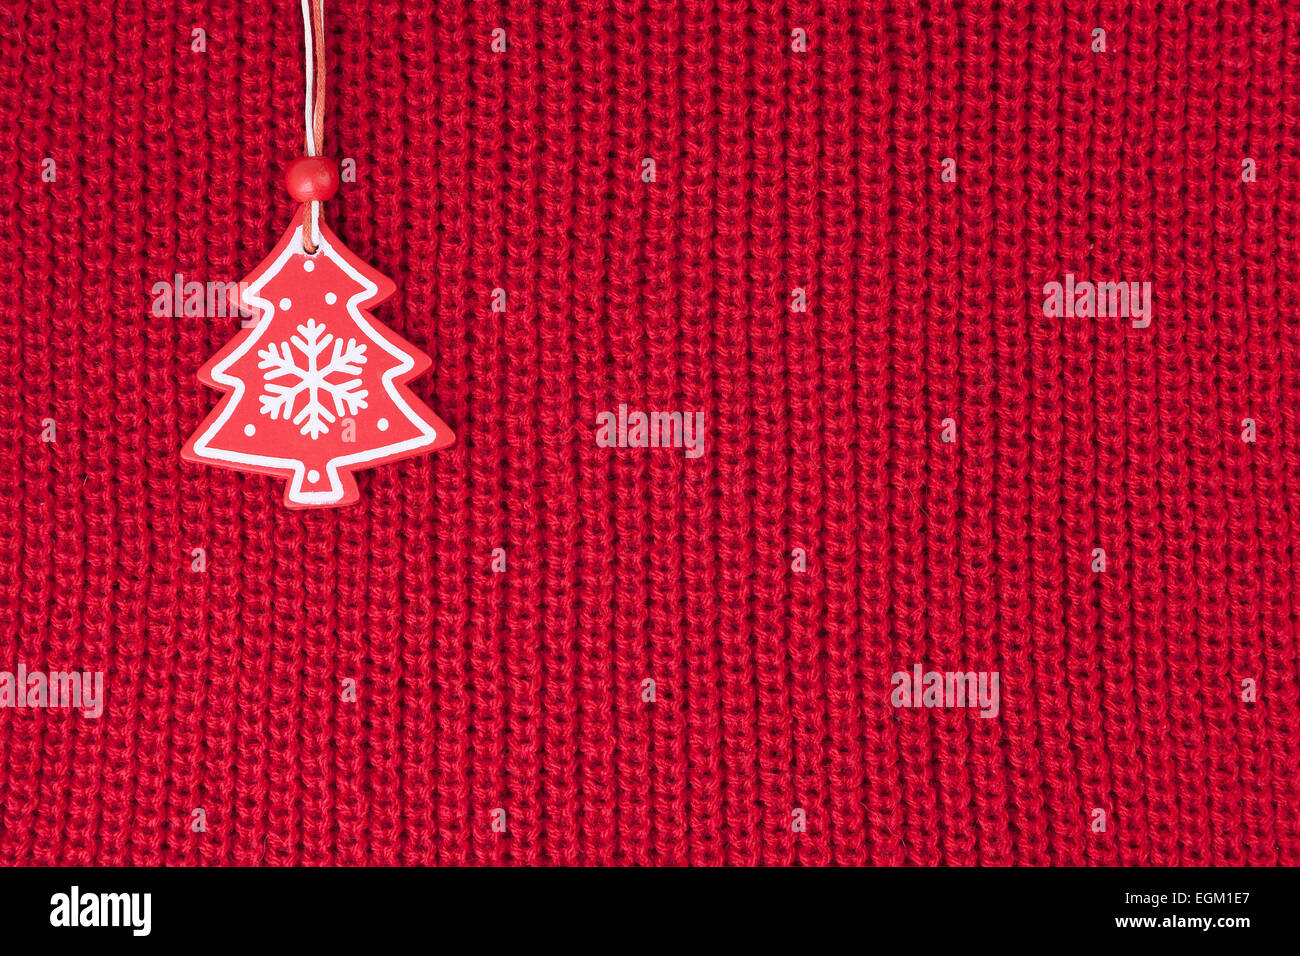 Christmas fir tree decoration on red wool knitted fabric background Stock Photo